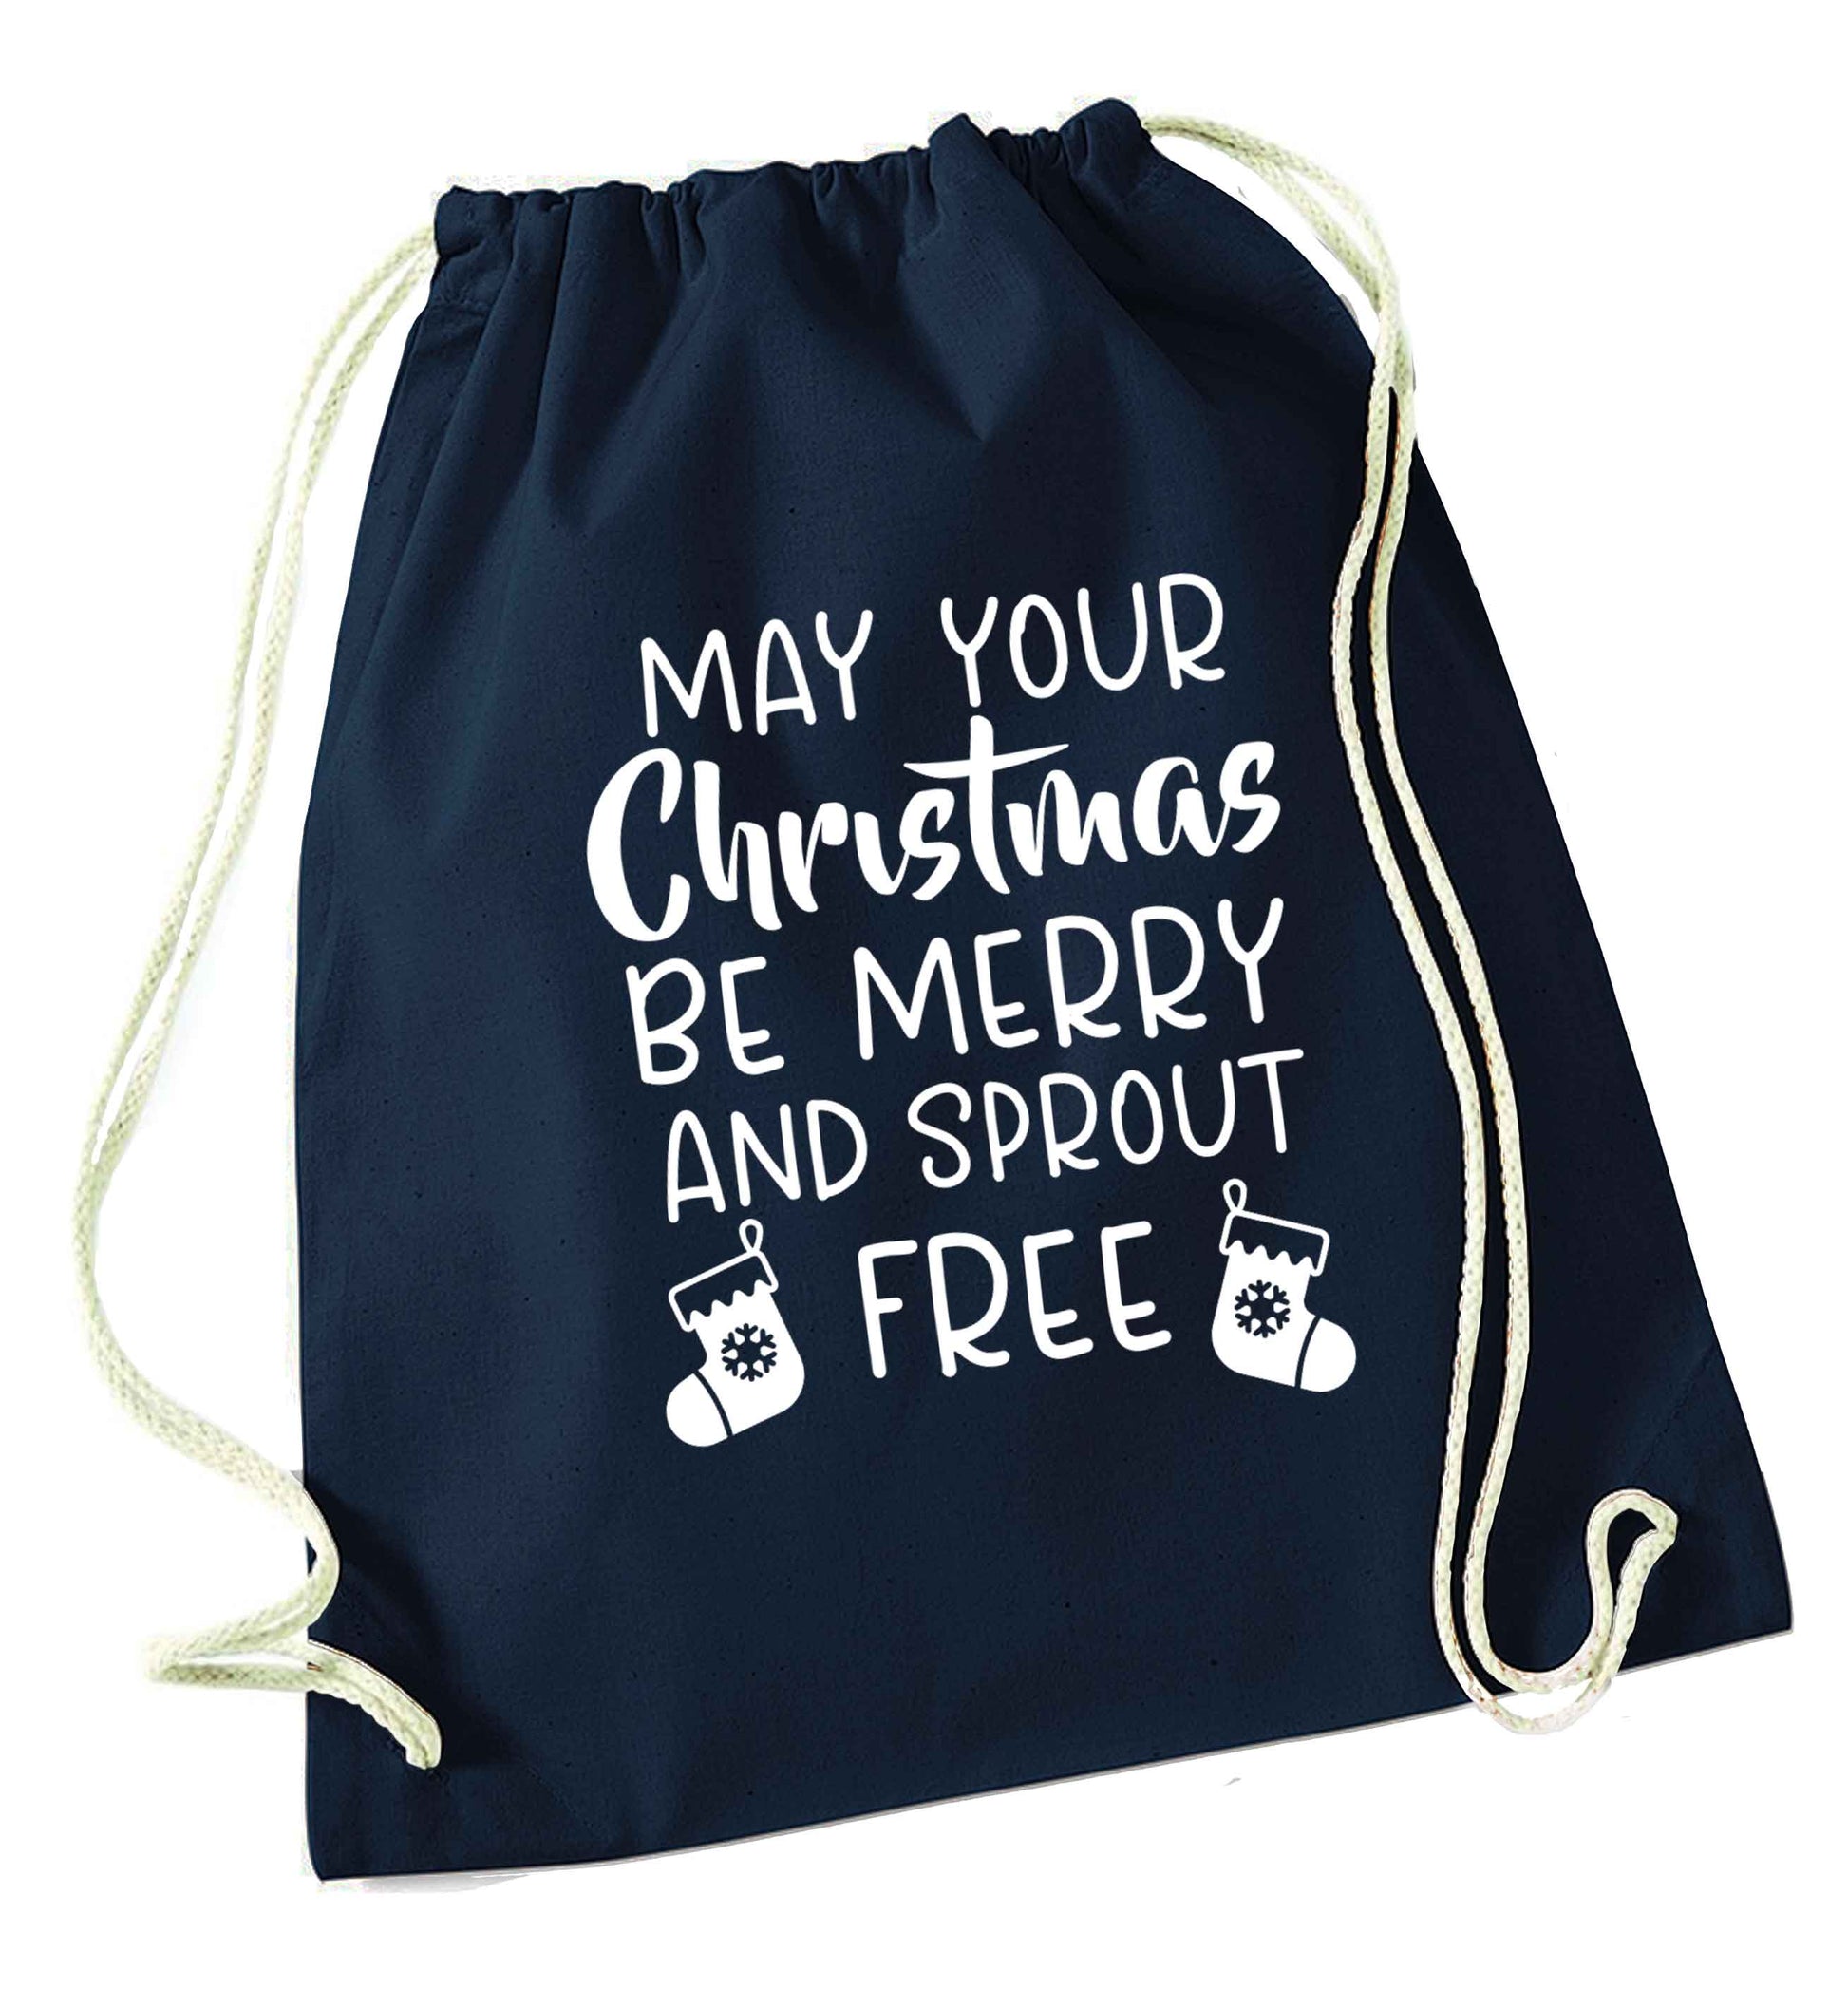 May your Christmas be merry and sprout free navy drawstring bag